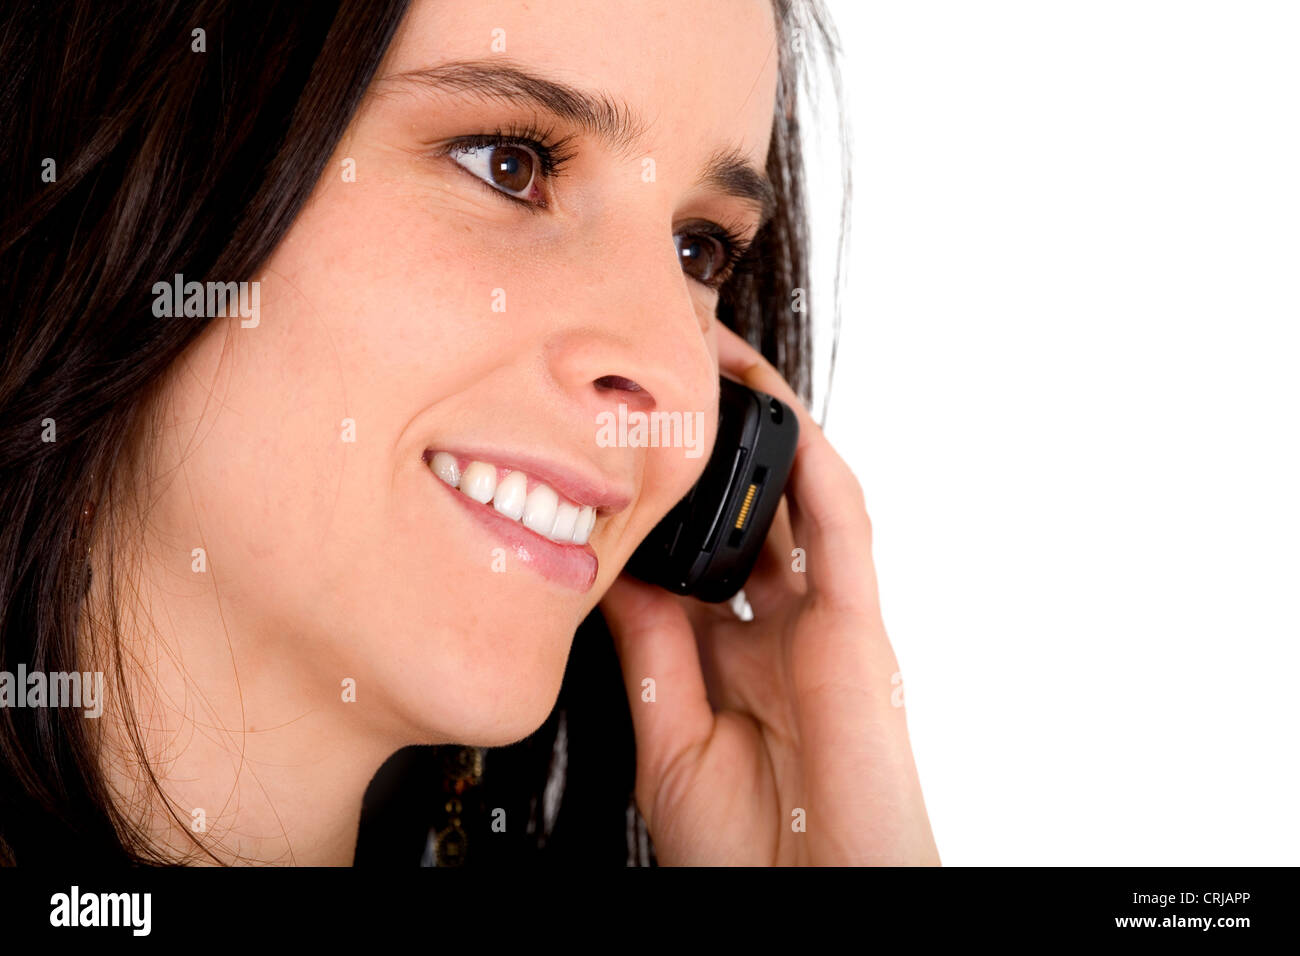 girl on the phone Stock Photo